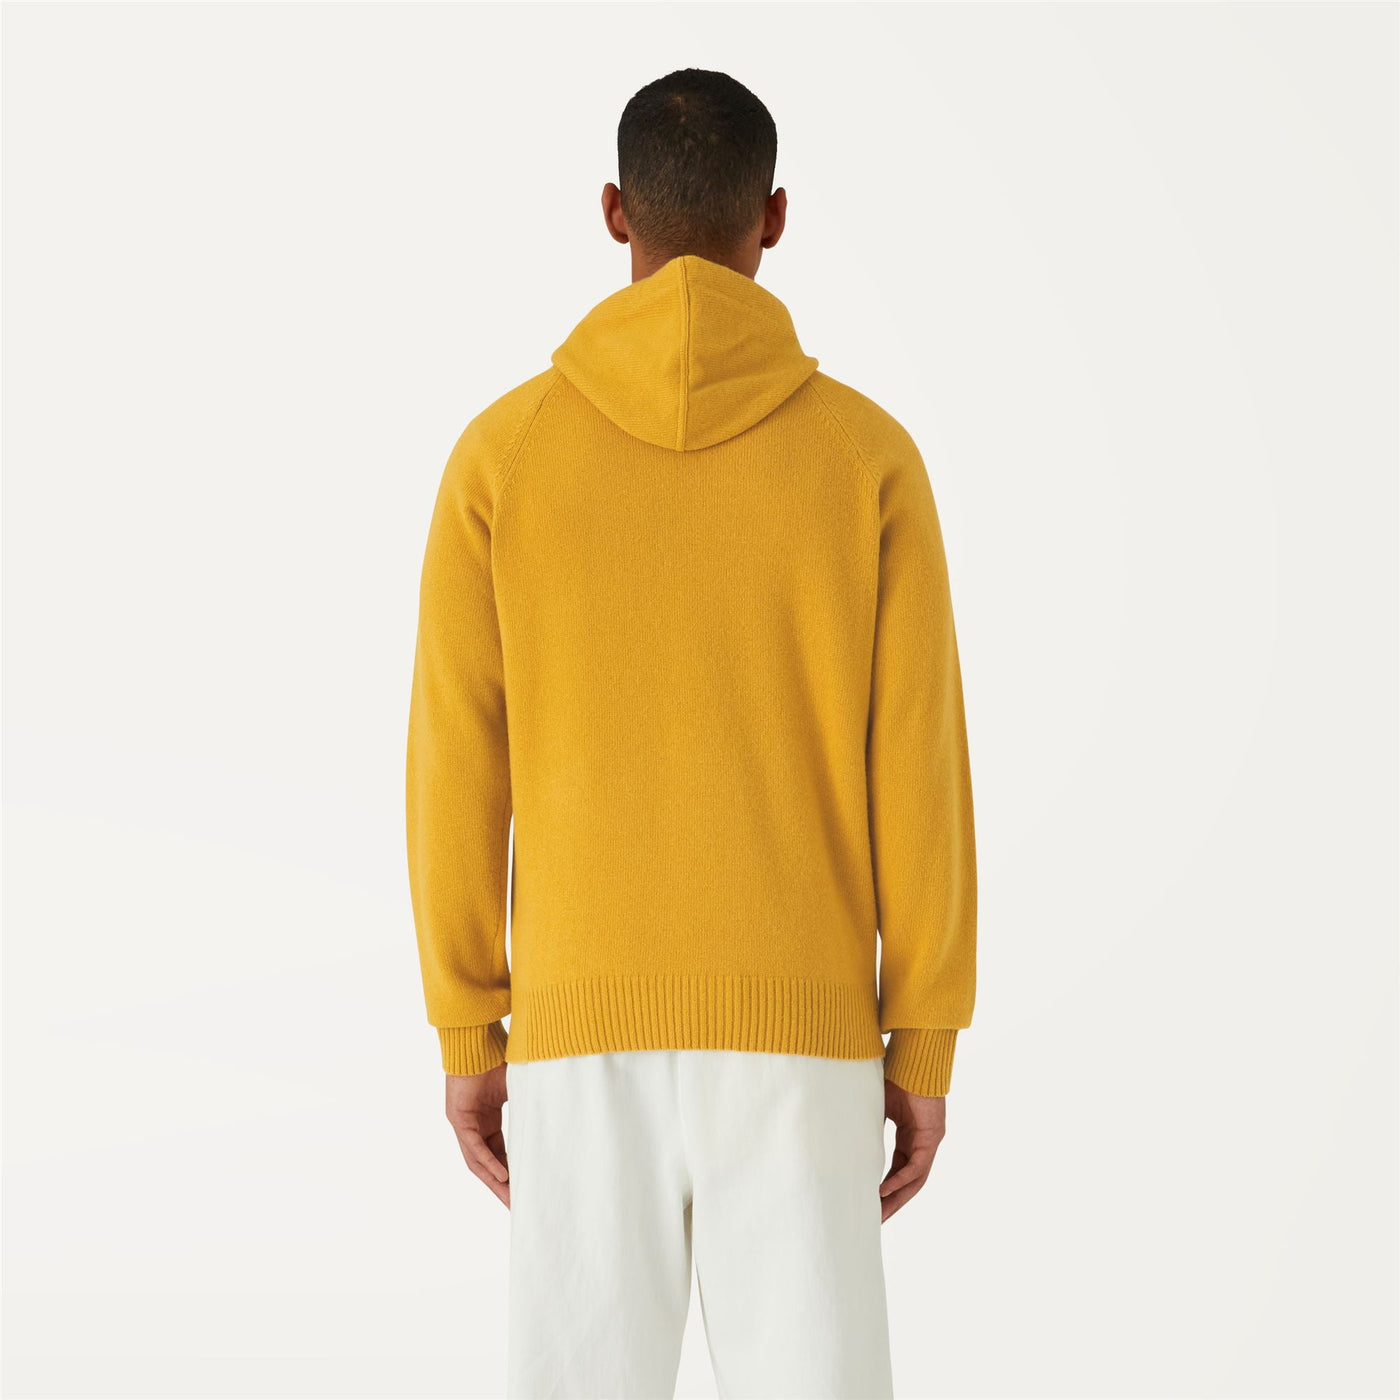 Knitwear Man RICHIE LAMBSWOOL Jumper Yellow Raspberry | kway Dressed Front Double		